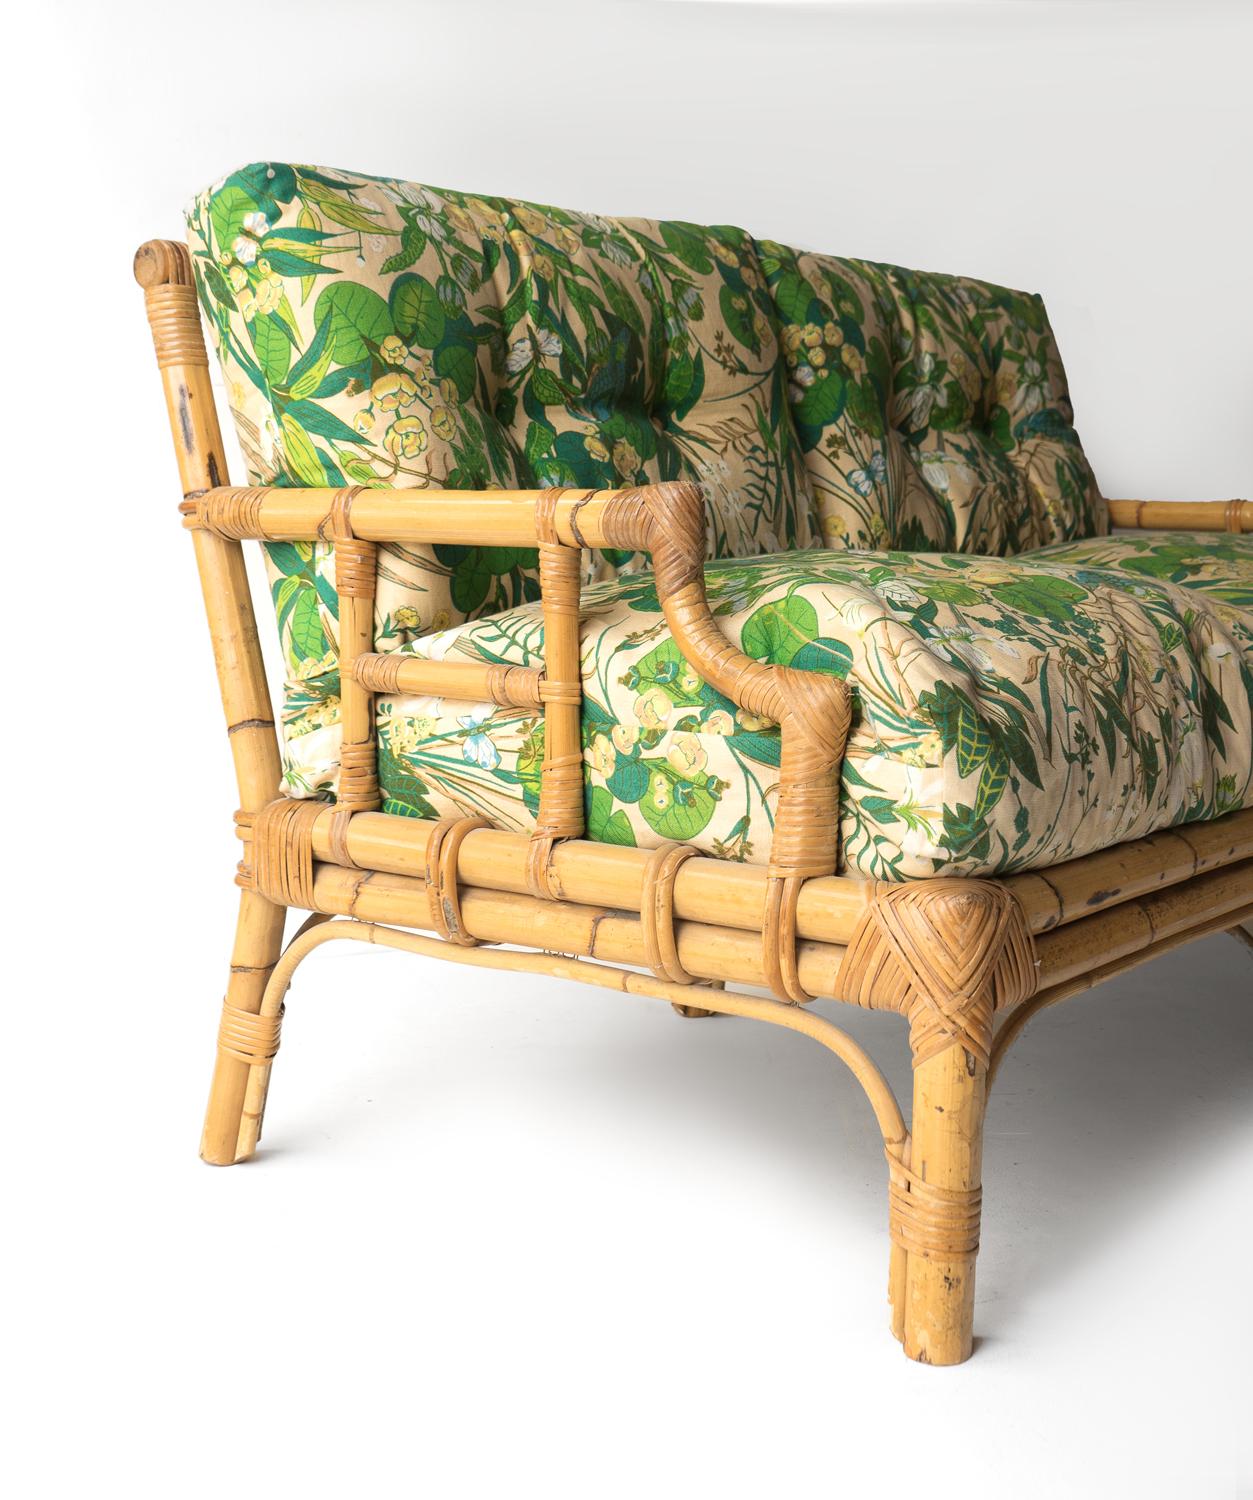 20th Century Vintage Italian Floral Upholstered Bamboo And Rattan Sofa By Vivai Del Sud 1970s